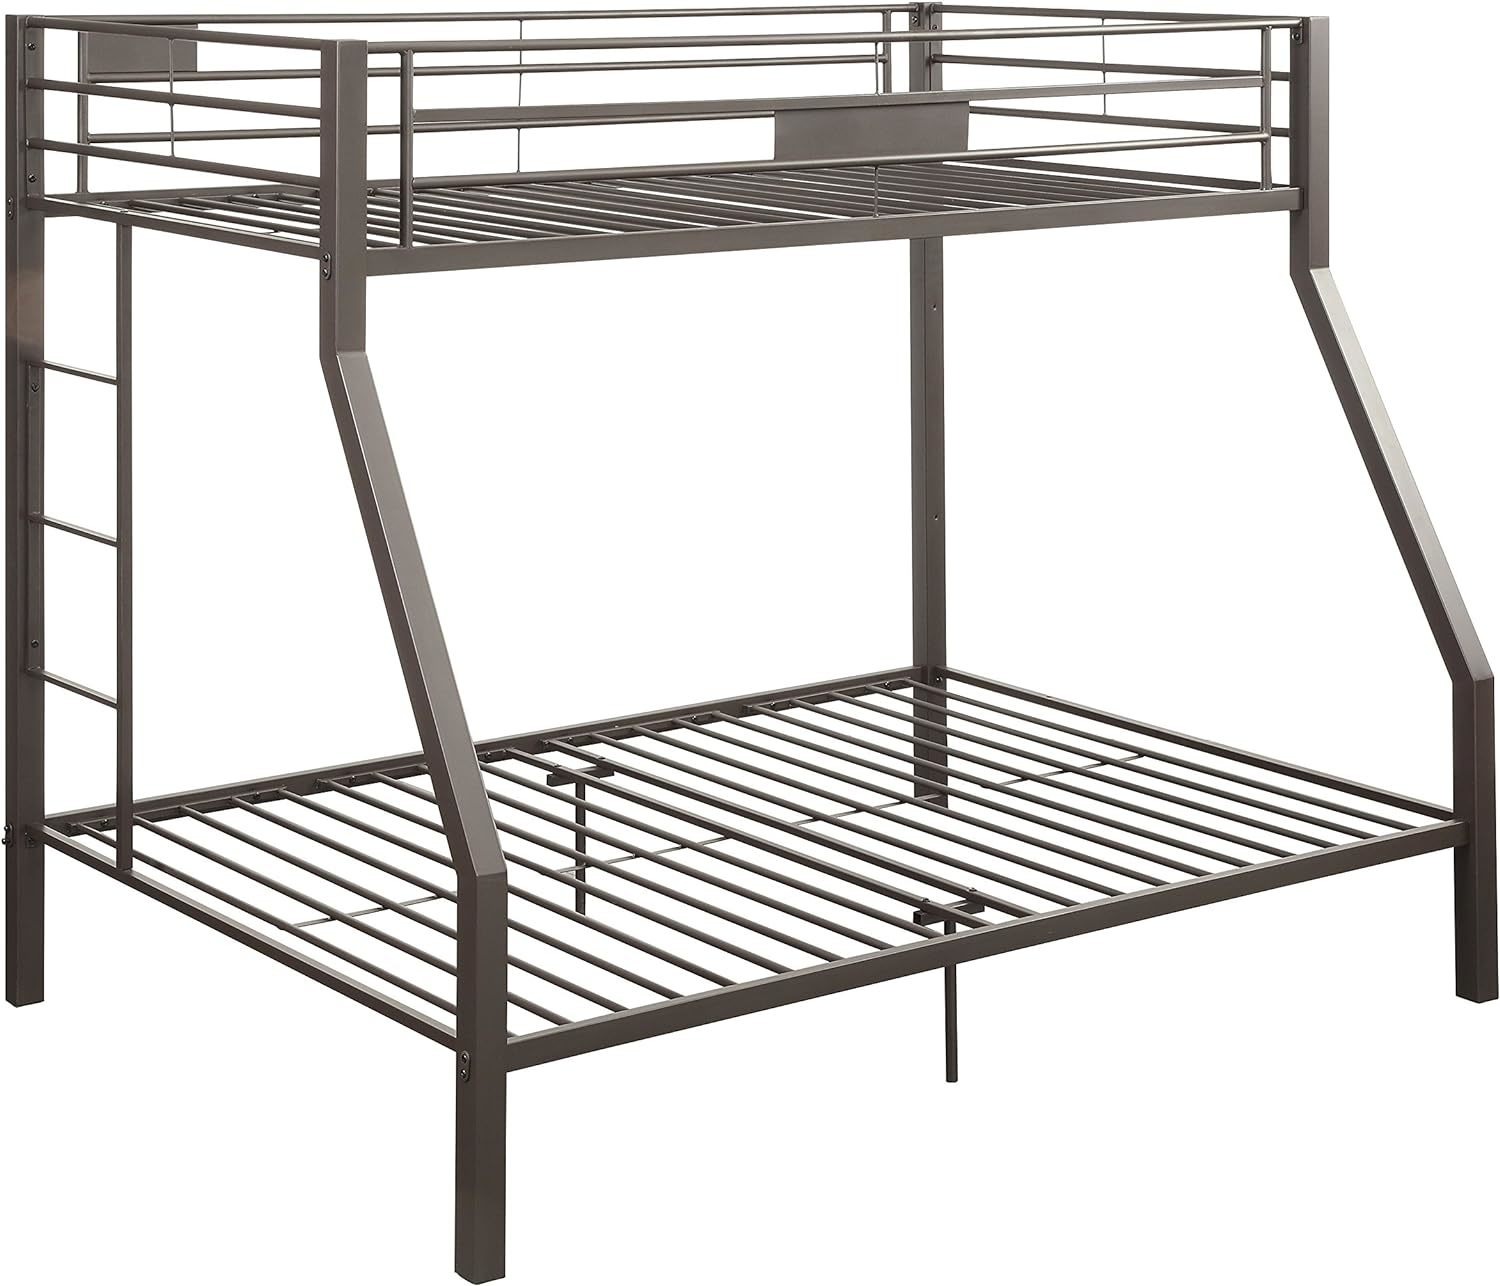 Twin Over Full Bunk Bed In Acme Limbra Brown. - $503.99